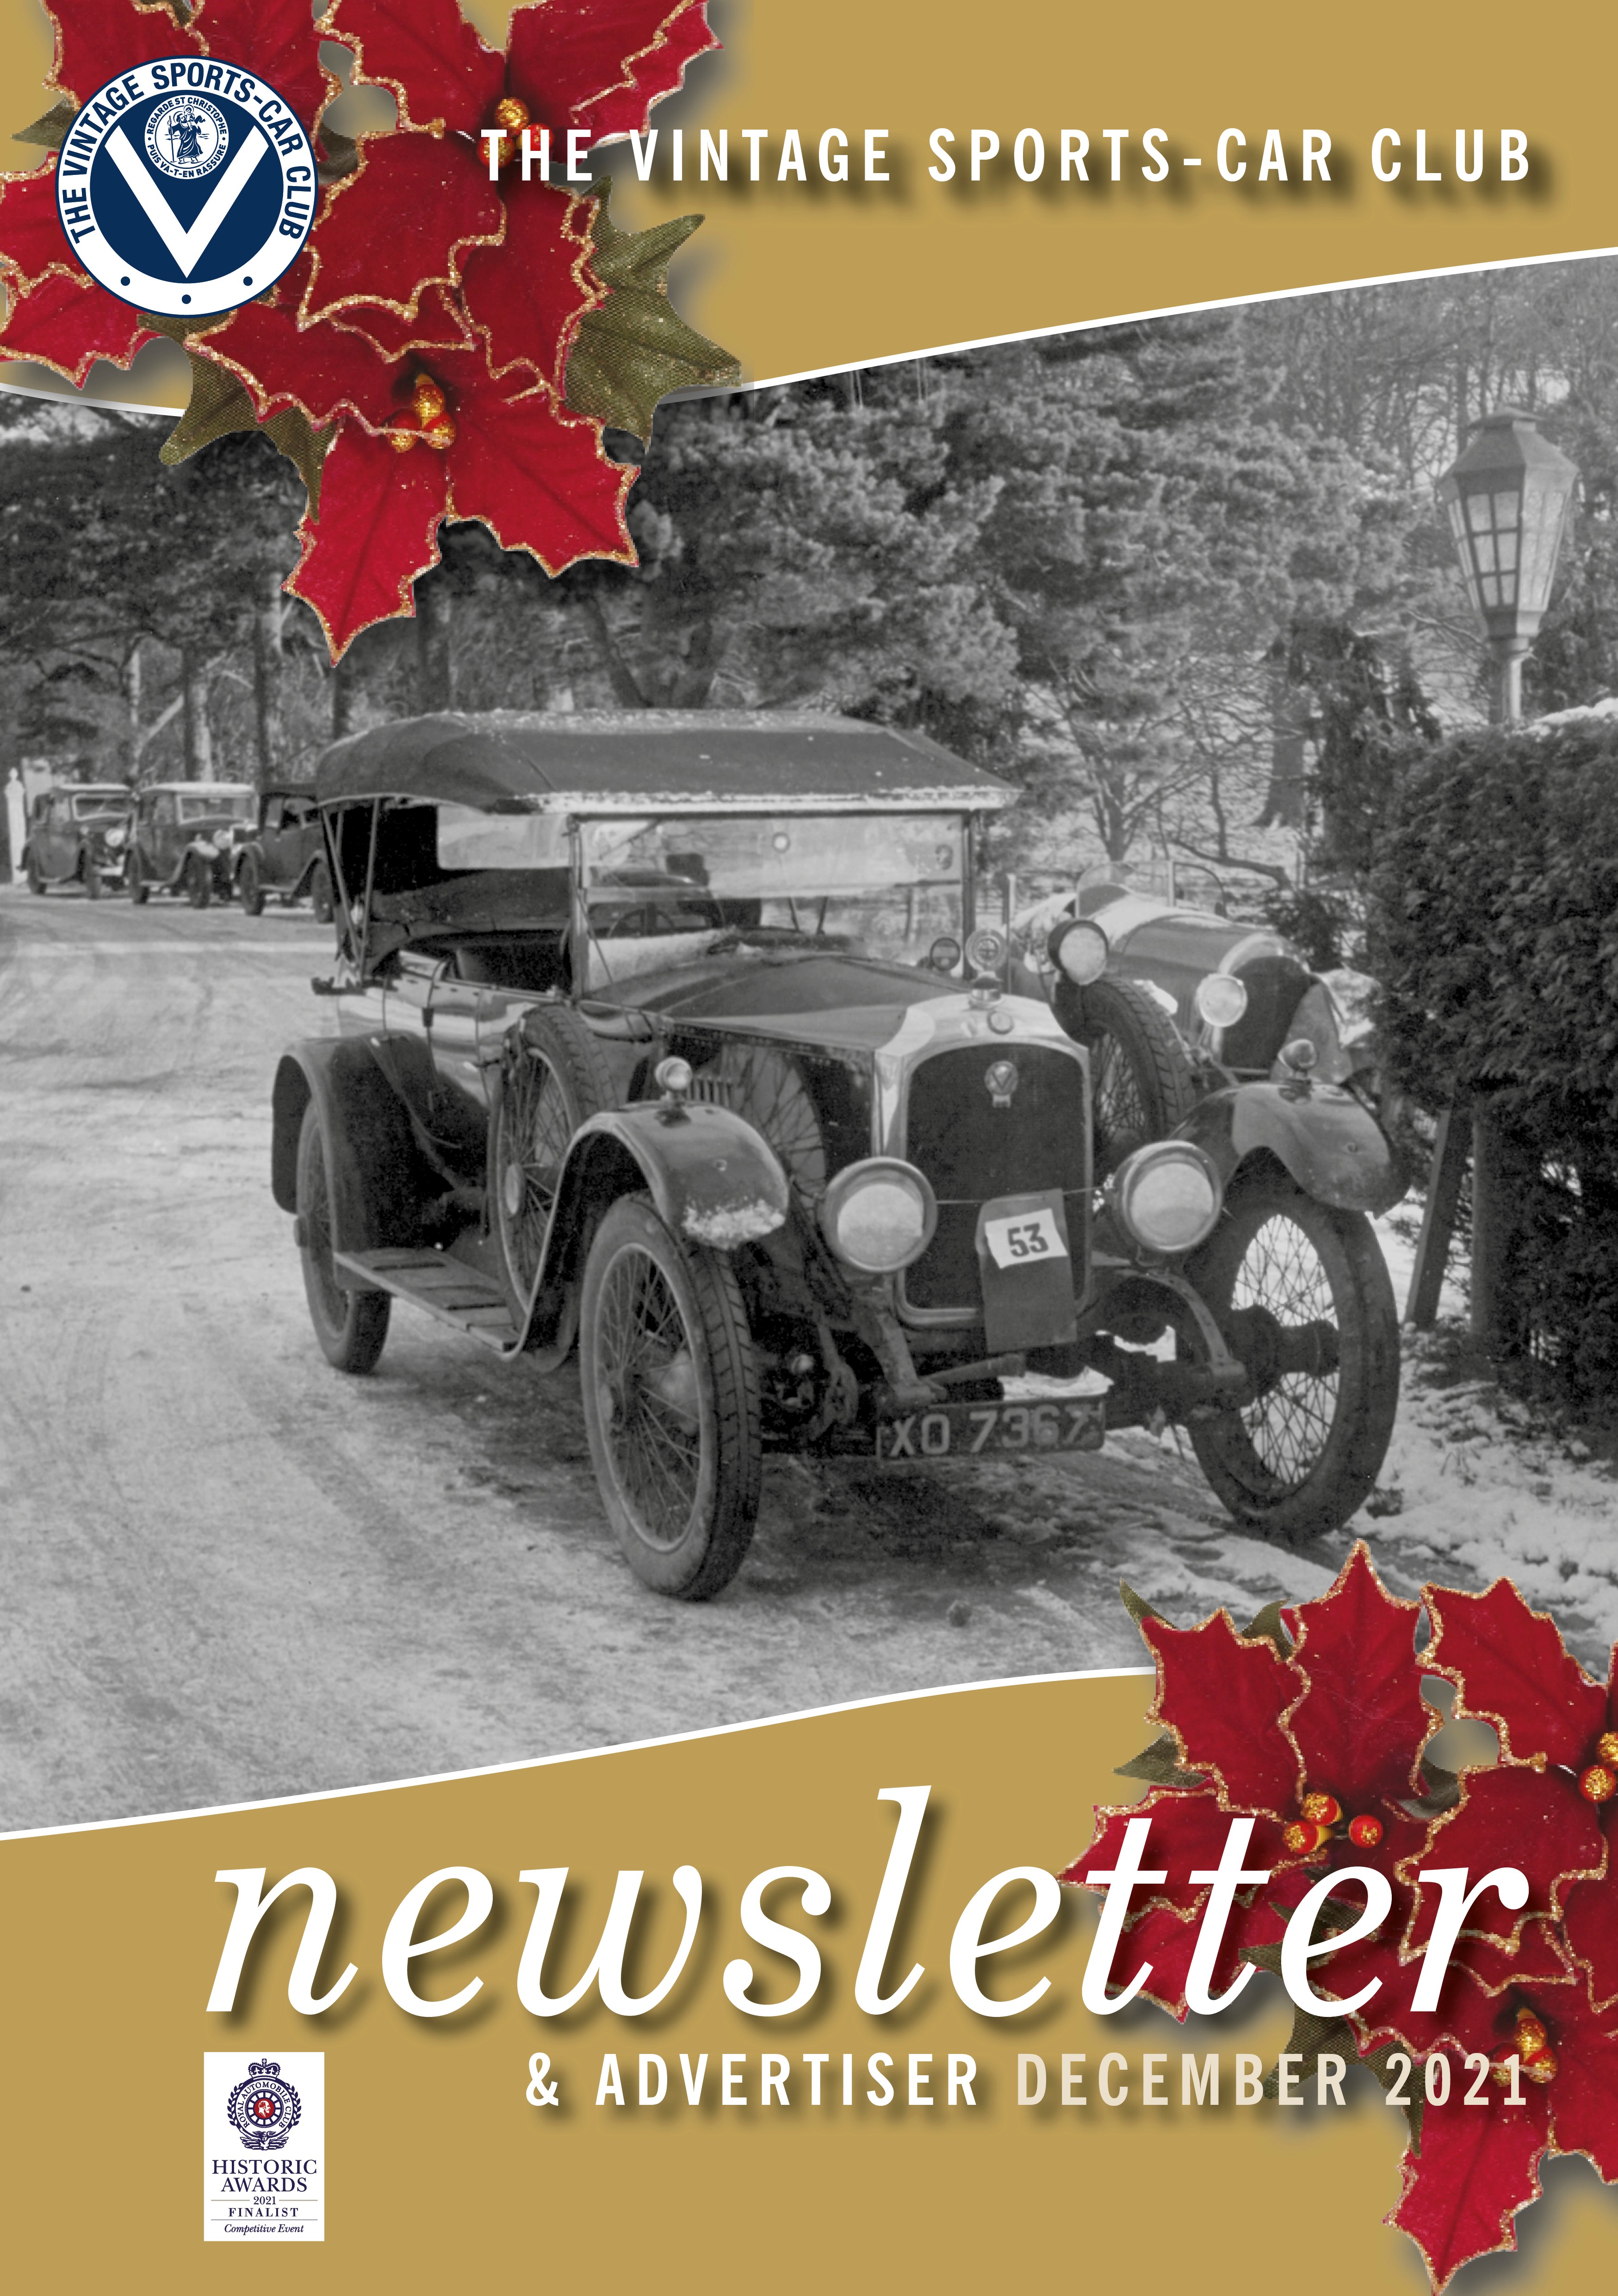 December 2021 Newsletter Now Available